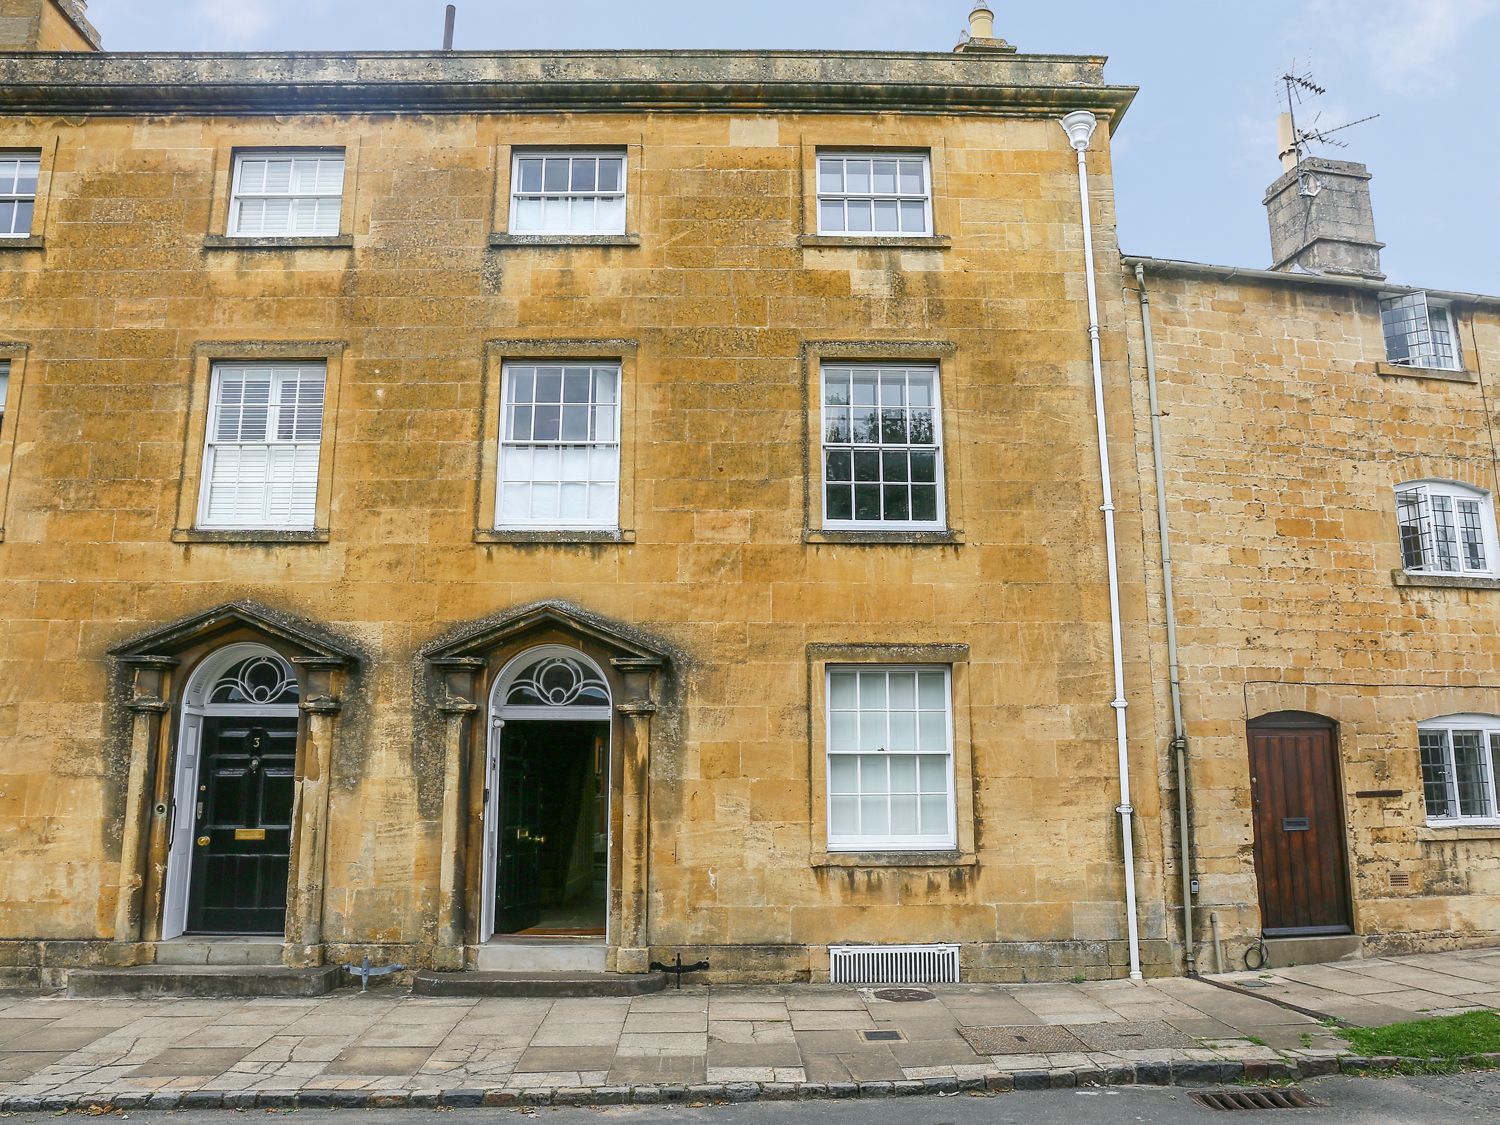 4 Maidens Row - Cotswolds - 1012523 - photo 1